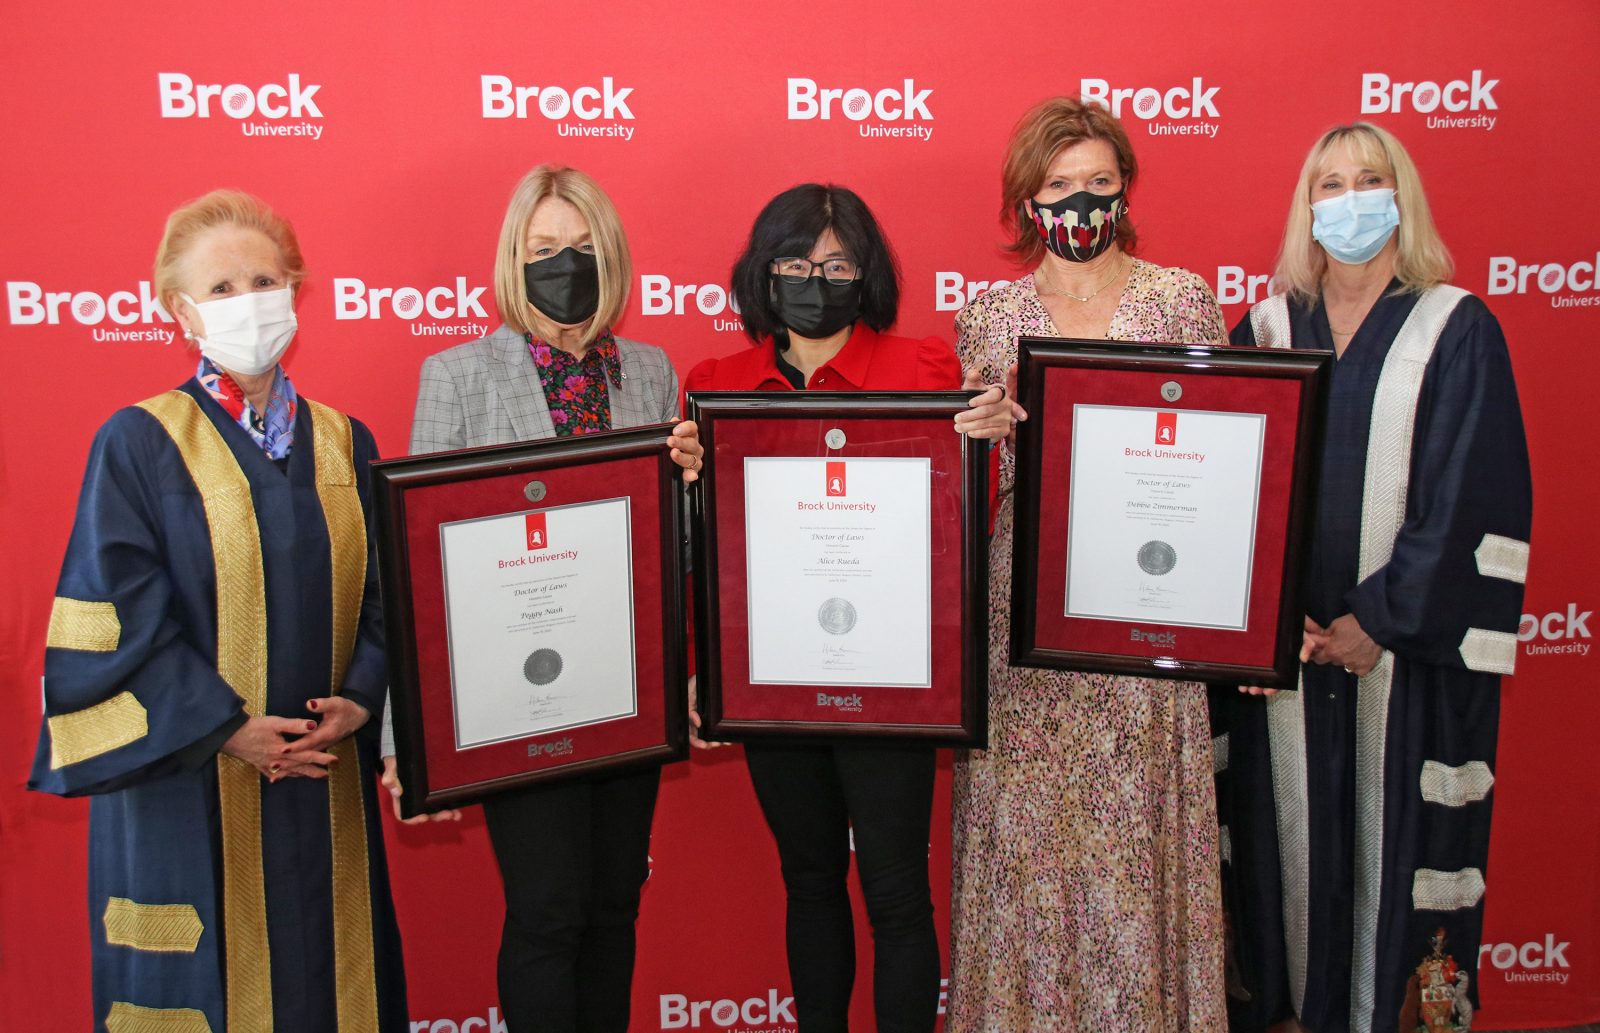 Five women are pictured with three holding honorary degrees.